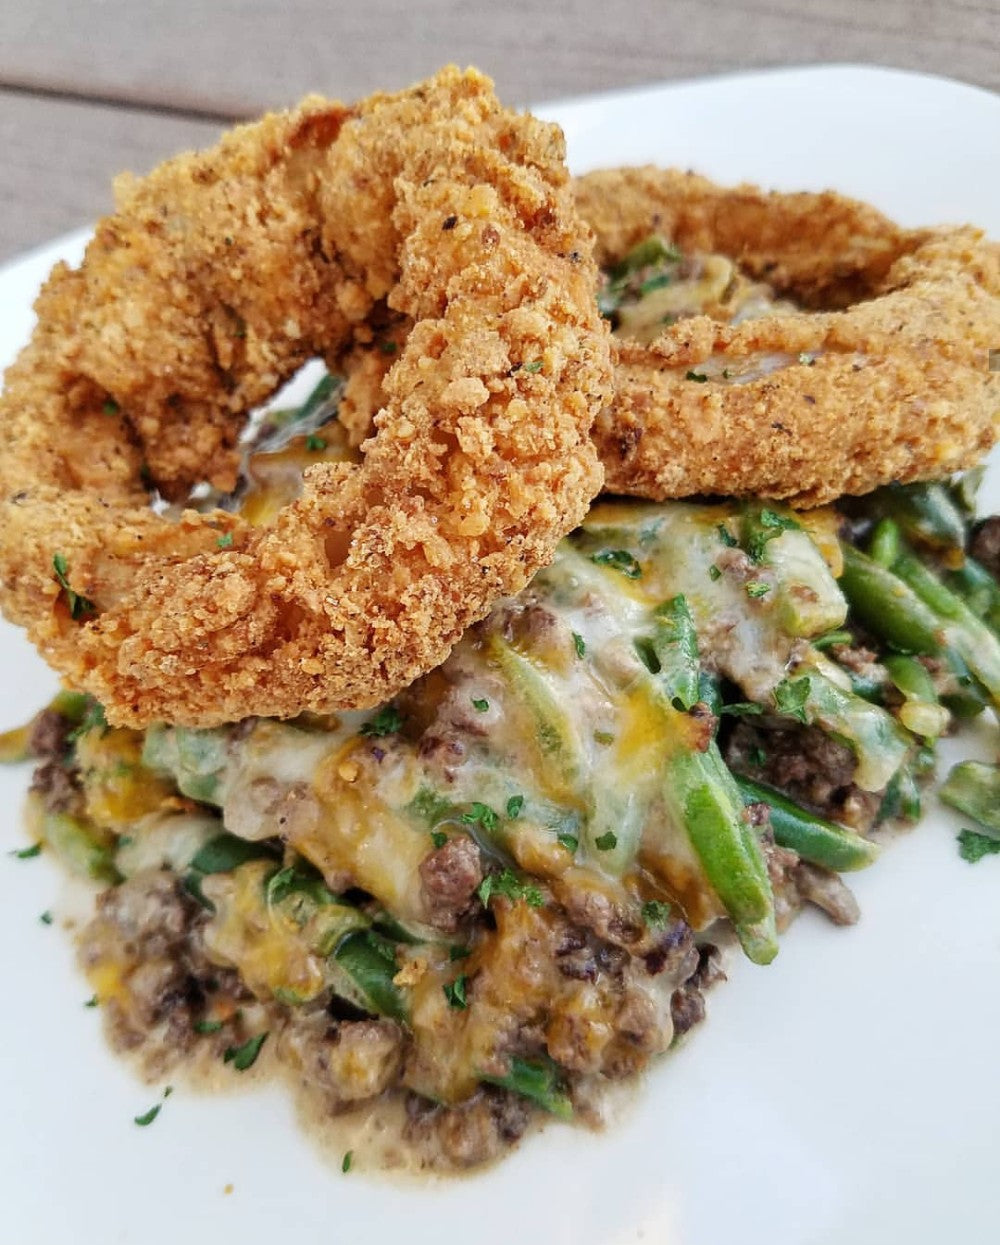 Ground Beef Bake with Crispy Onion Rings by @LowKarbKhaleesi